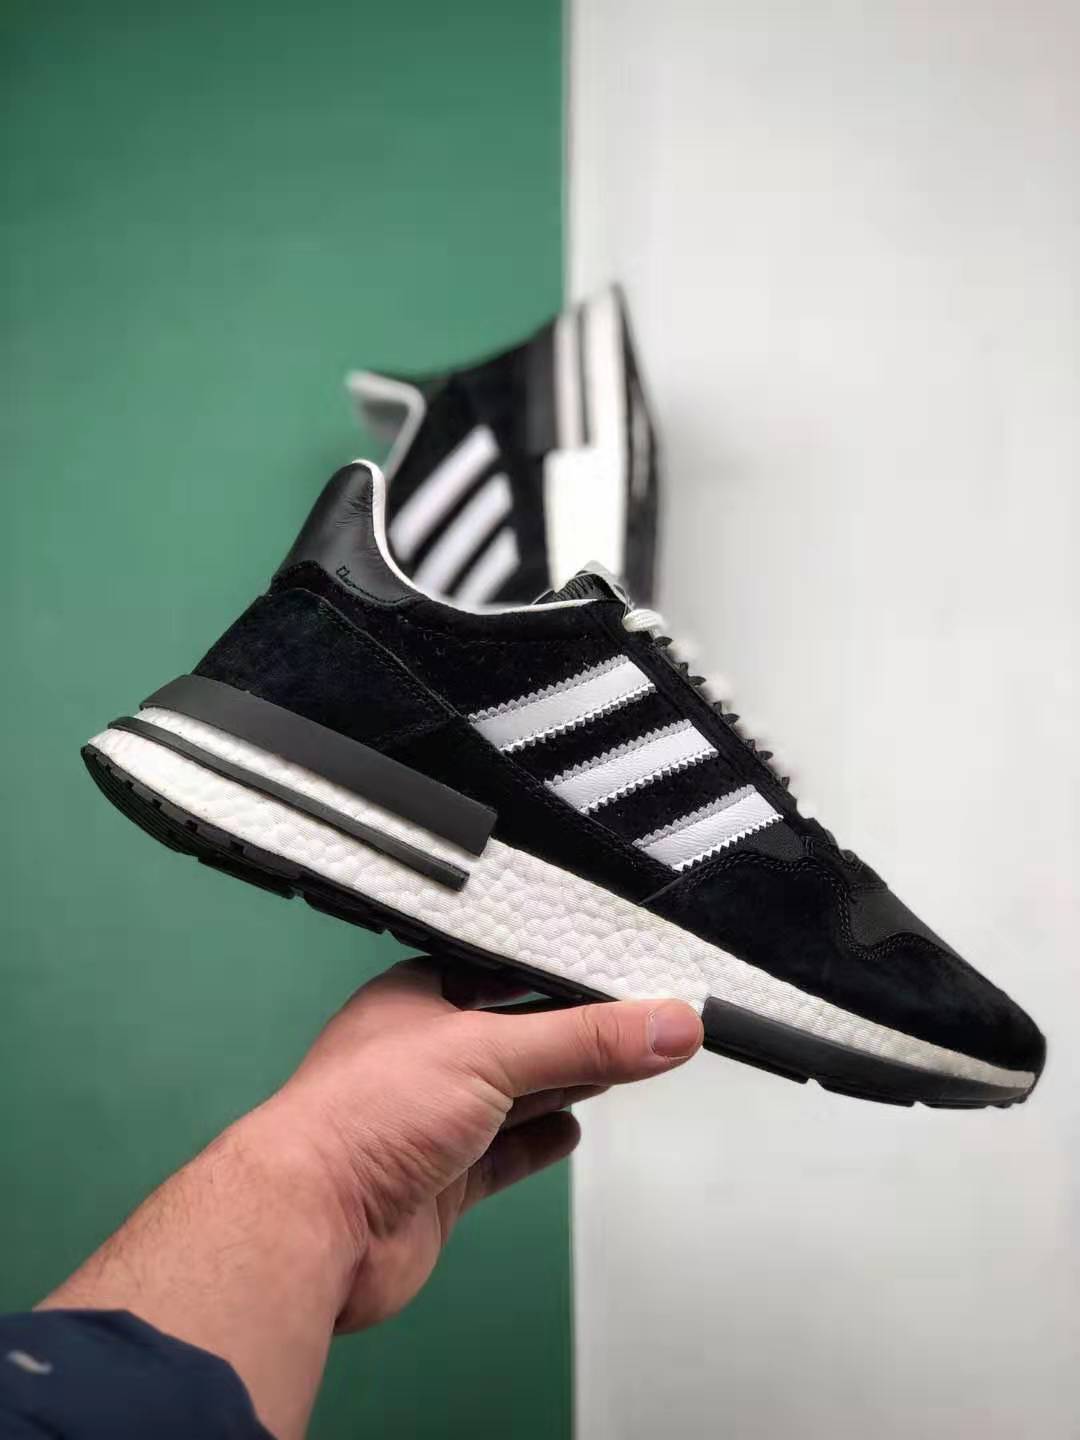 Adidas ZX500 RM Boost Originals BB6822 - Limited Edition Retro Sneakers